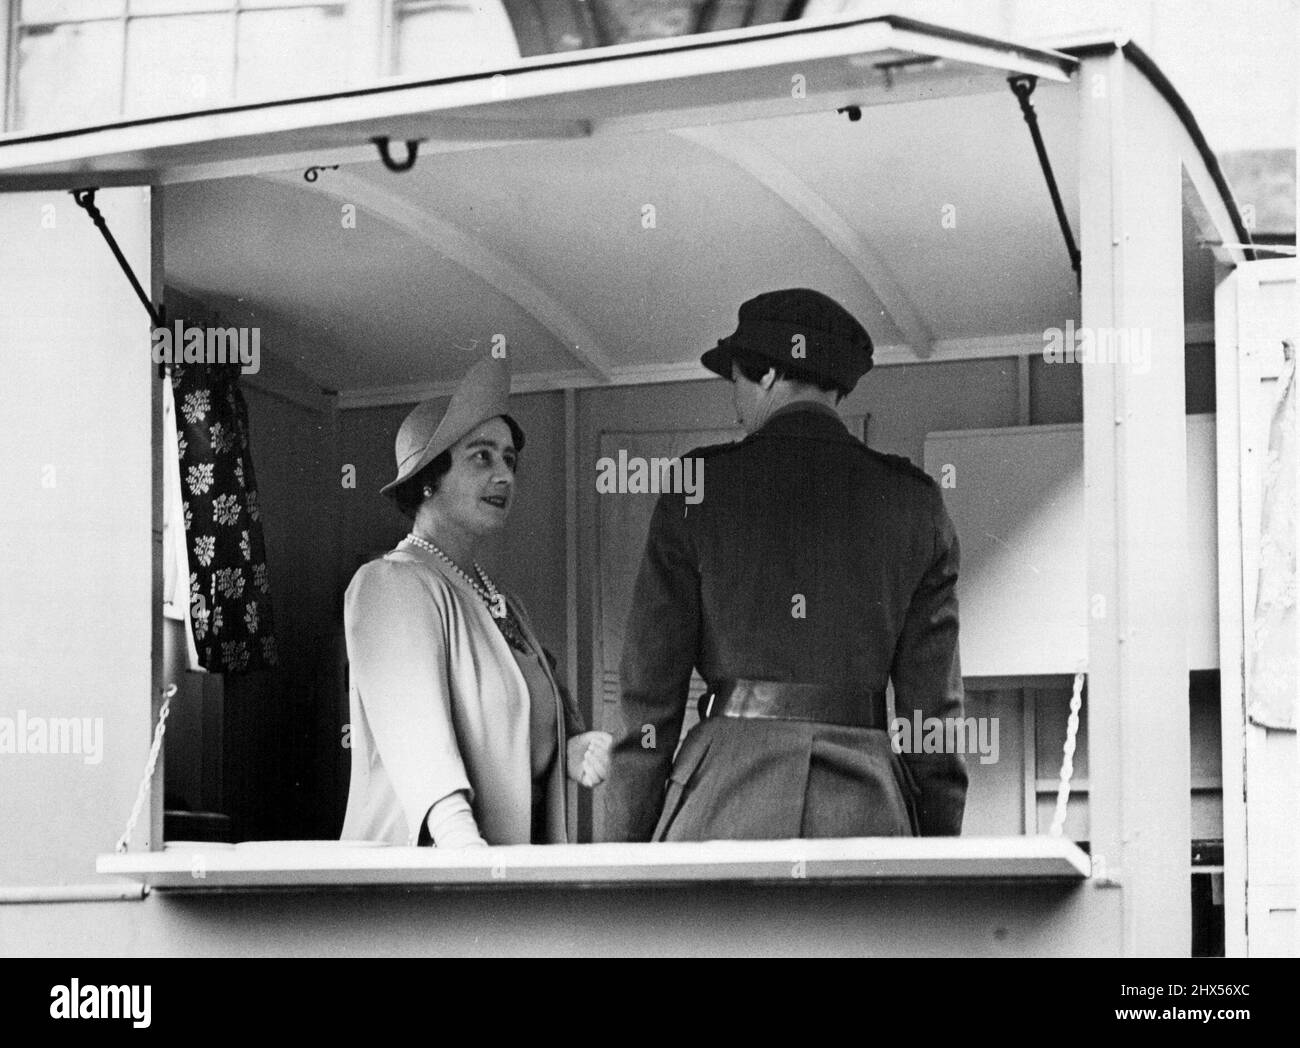 Queen Inspects Women's Legion - The Queen inspecting the interior of a mobile canteen which serves L.D.V.S. on night duty. Once a week uniformed women drill at the Royal Mews, Buckingham Palace, London, and last night they were inspected by the Queen. They are members of the Women's Legion. They are members of the Women's Legion, the famous Corps founded in 1914. The Women's legion is a voluntary Corps which has been included in the Army list since it began in 1914. October 24, 1940. (Photo by London News Agency Photos). Stock Photo